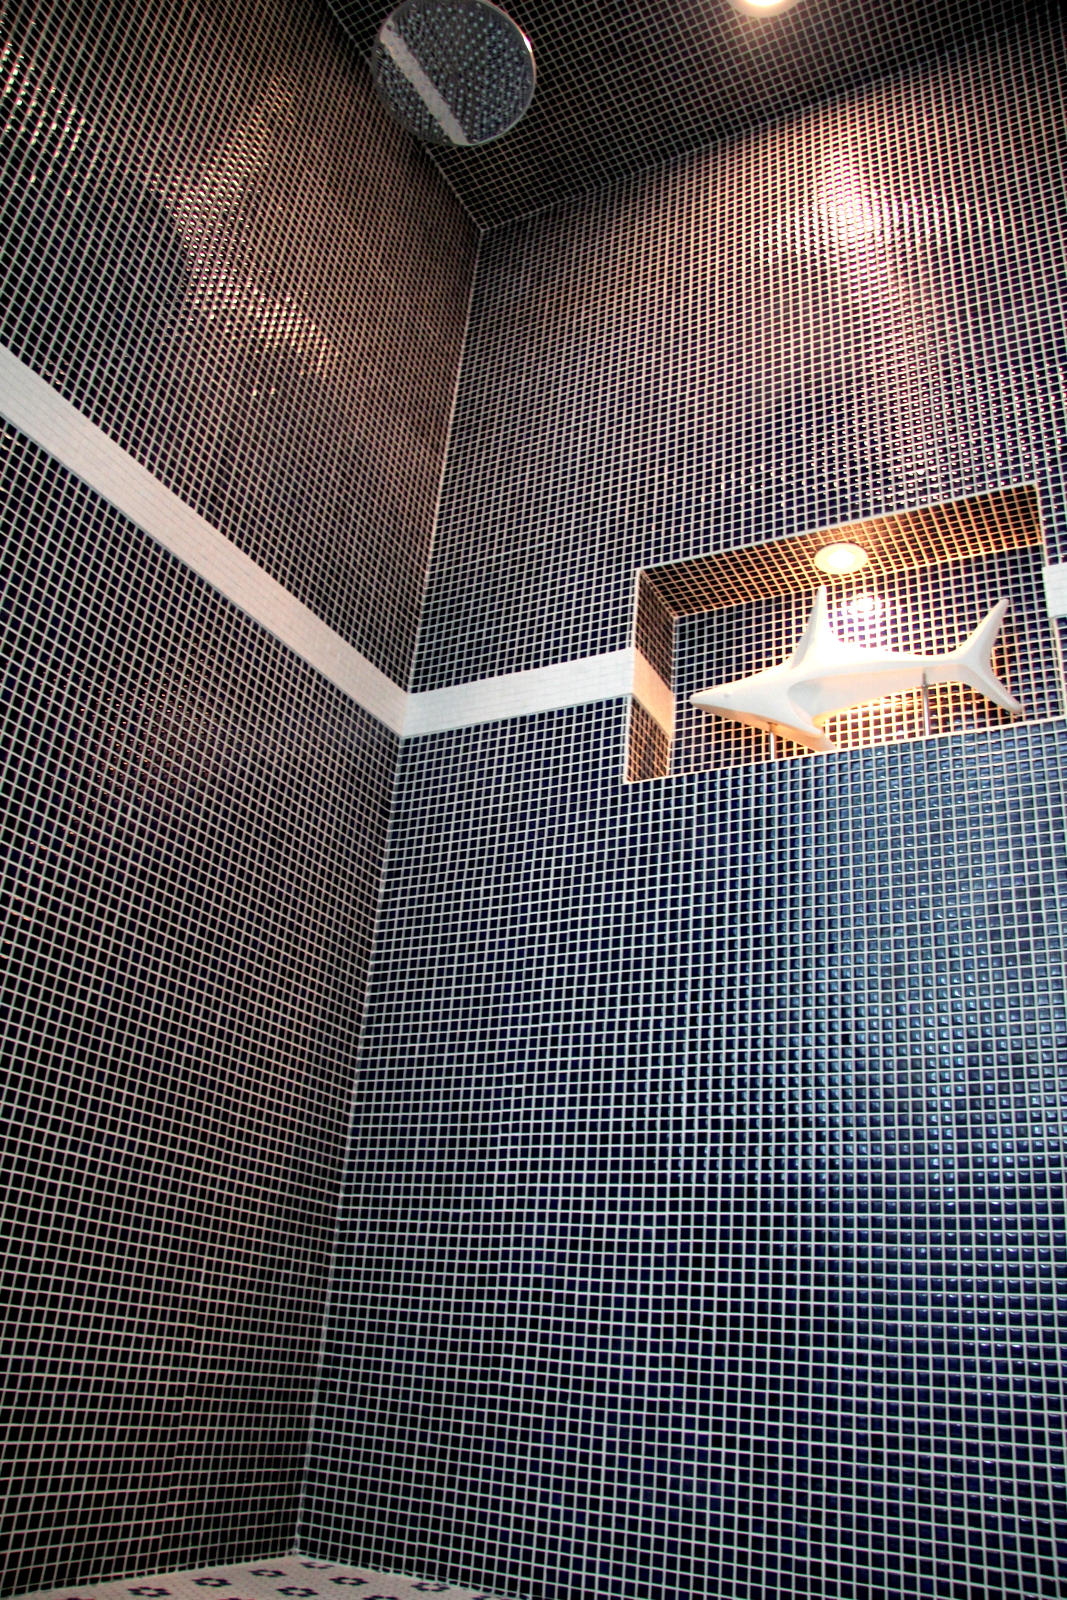 Tiled Showers and wonderful built in shelves can provide comfort and fun, while remaining elegant coastal baths from Thornhill Construction.